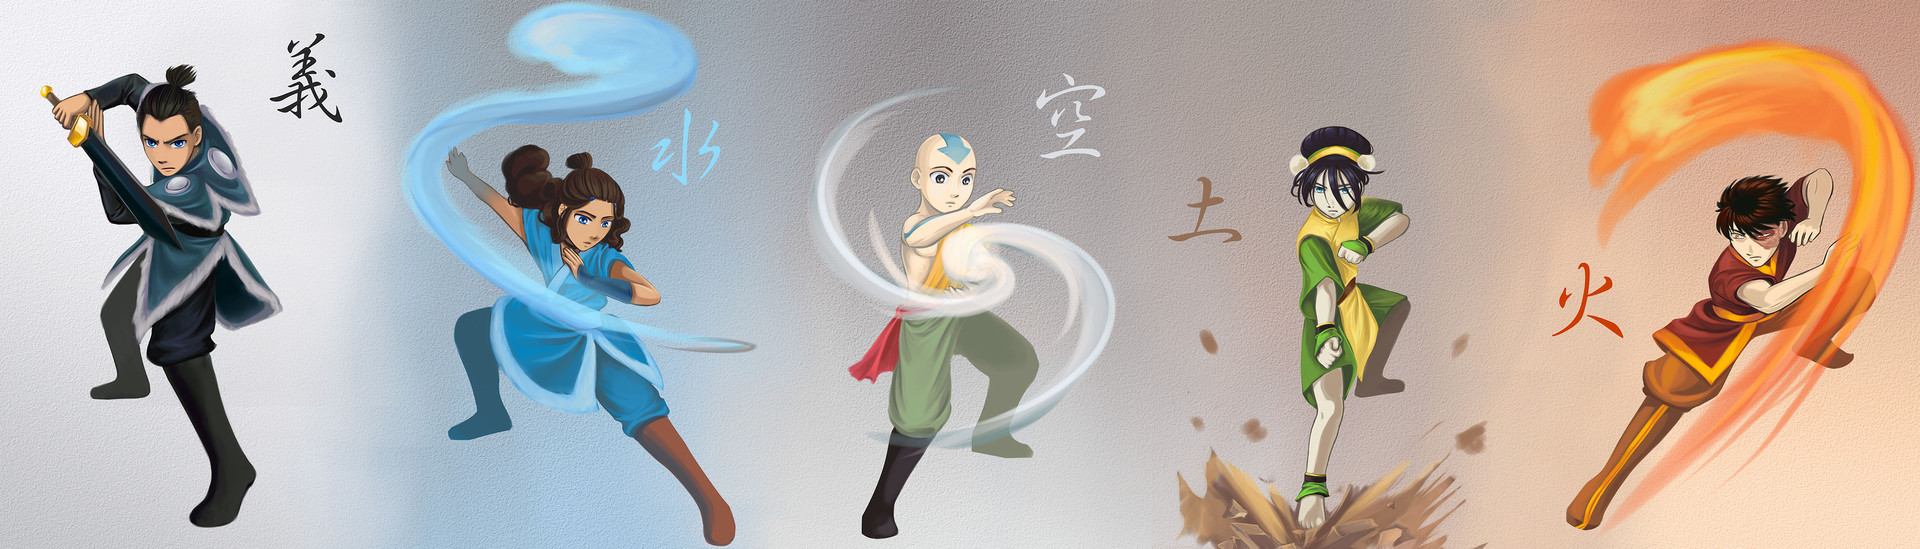 Oli from the Block  6 Avatar the Last Airbender Character fan arts pt